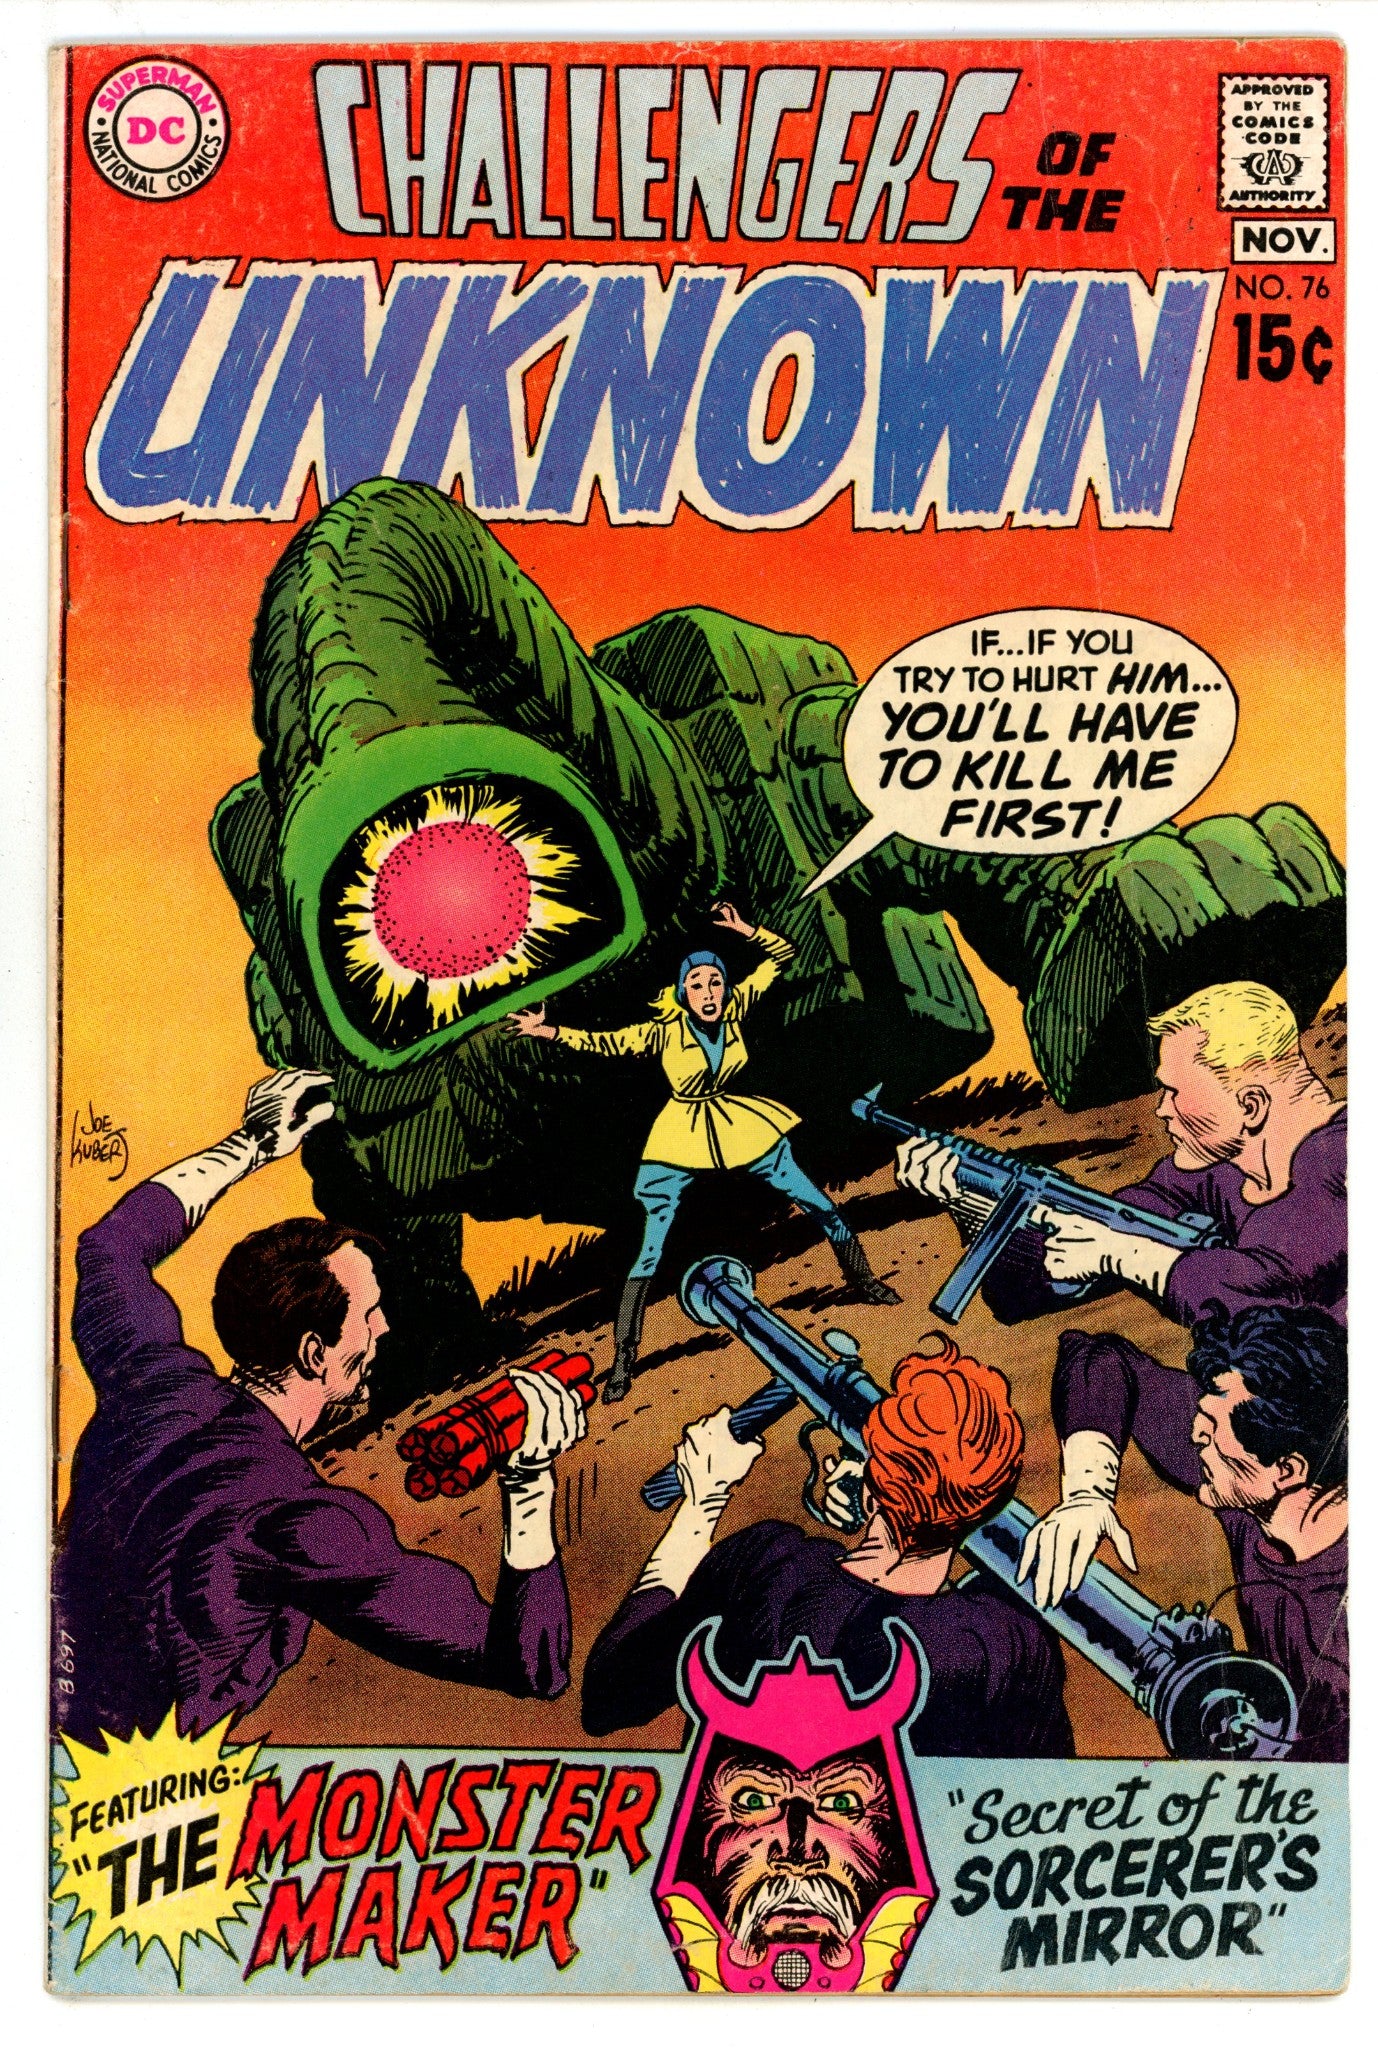 Challengers of the Unknown Vol 1 76 VG+ (4.5) (1970) 